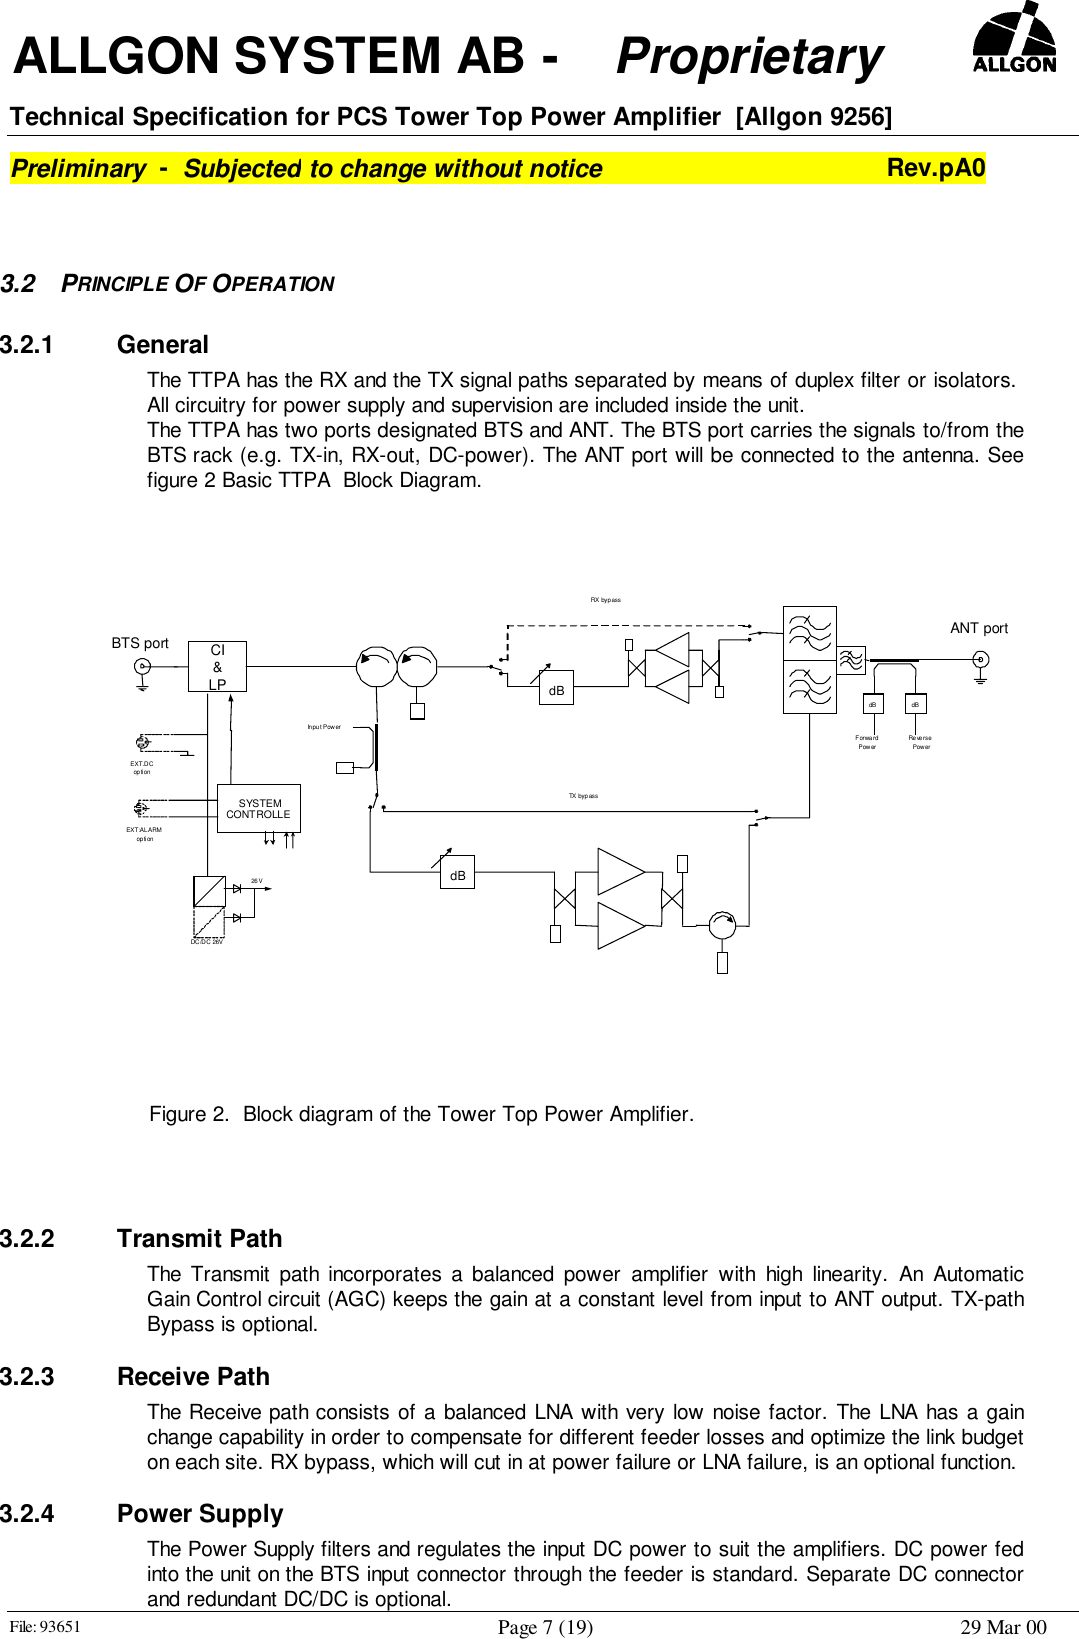  ALLGON SYSTEM AB -    Proprietary     Technical Specification for PCS Tower Top Power Amplifier  [Allgon 9256]Preliminary  -  Subjected to change without notice Rev.pA0File: 93651 Page 7 (19) 29 Mar 003.2 PRINCIPLE OF OPERATION3.2.1 GeneralThe TTPA has the RX and the TX signal paths separated by means of duplex filter or isolators. All circuitry for power supply and supervision are included inside the unit.The TTPA has two ports designated BTS and ANT. The BTS port carries the signals to/from theBTS rack (e.g. TX-in, RX-out, DC-power). The ANT port will be connected to the antenna. Seefigure 2 Basic TTPA  Block Diagram.     3.2.2 Transmit Path The Transmit path incorporates a balanced power amplifier with high linearity. An AutomaticGain Control circuit (AGC) keeps the gain at a constant level from input to ANT output. TX-pathBypass is optional.3.2.3 Receive Path The Receive path consists of a balanced LNA with very low noise factor. The LNA has a gainchange capability in order to compensate for different feeder losses and optimize the link budgeton each site. RX bypass, which will cut in at power failure or LNA failure, is an optional function.3.2.4 Power Supply The Power Supply filters and regulates the input DC power to suit the amplifiers. DC power fedinto the unit on the BTS input connector through the feeder is standard. Separate DC connectorand redundant DC/DC is optional. Figure 2.  Block diagram of the Tower Top Power Amplifier.EXT.DCop ti onCI&amp;LPdBIn pu t Pow erBTS portDC /D C 26V26 VdB dBANT portForwardPowerRe ve r sePowerTX by p assdBRX byp assSYSTEMCONT ROLLEEXT:ALARMop ti on